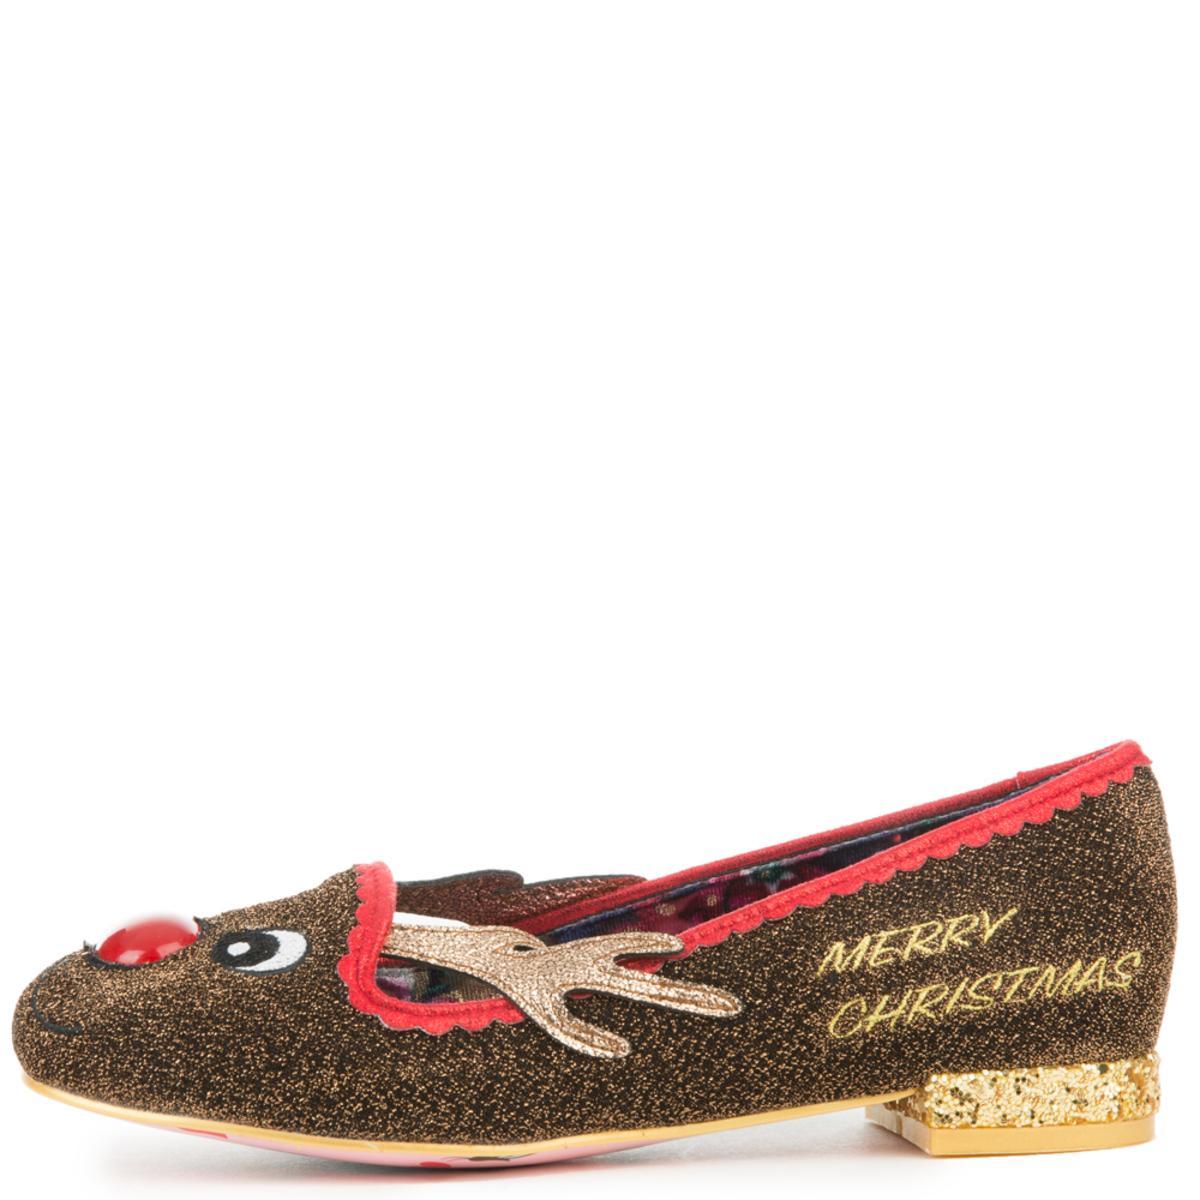 RED NOSE ROO FLATS BROWN/RED